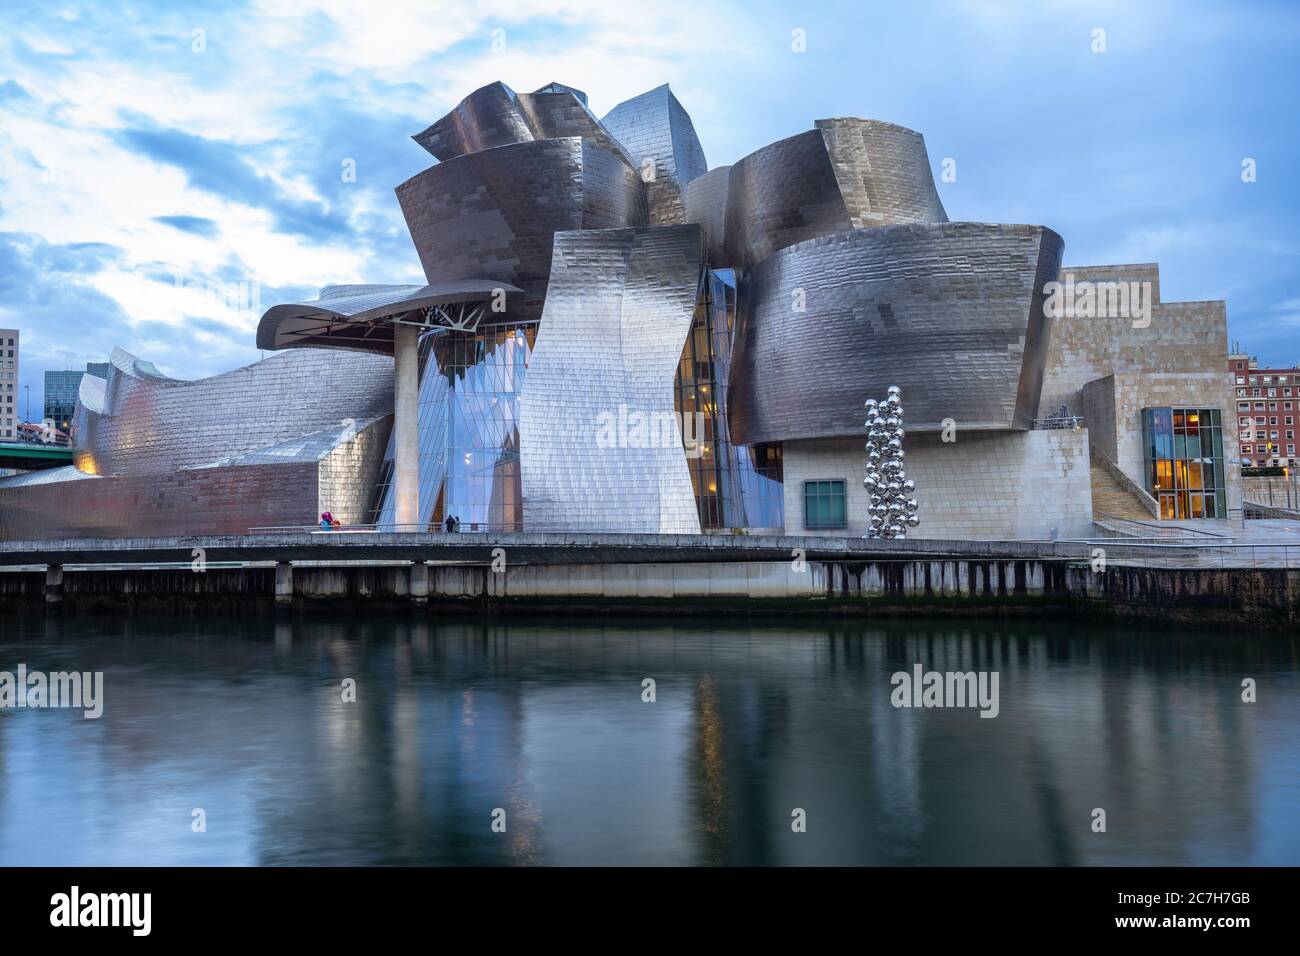 Europe, Spain, Basque Country, Vizcaya Province, Bilbao, view over the Nervión to the Guggenheim Museum Bilbao Stock Photo